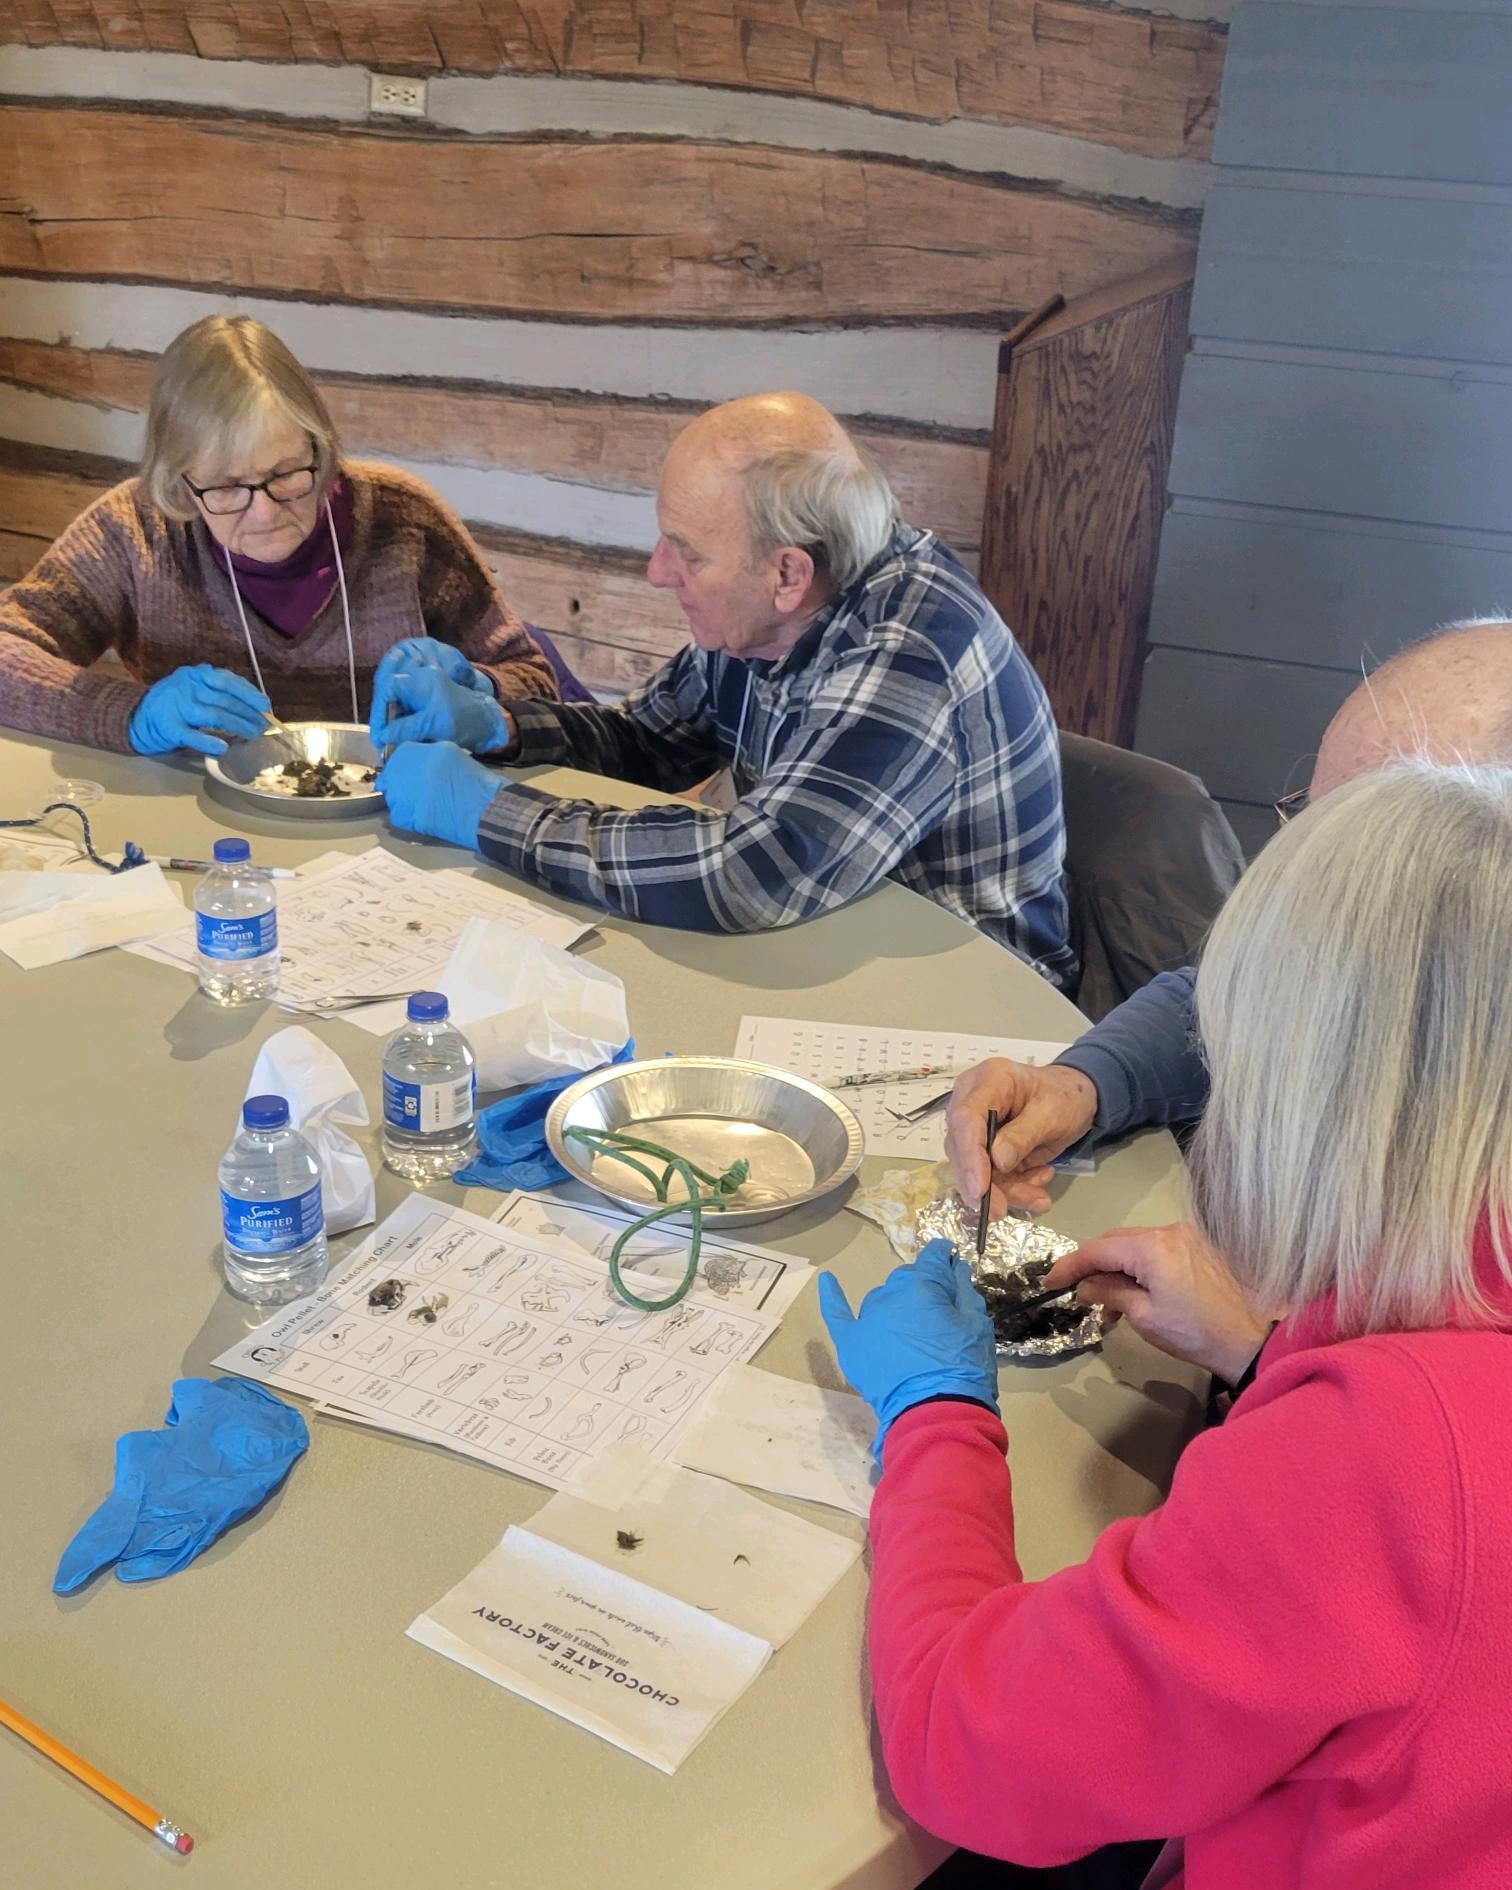 4 older adults concentrate on dissecting owl pellets at a table in the Riveredge barn